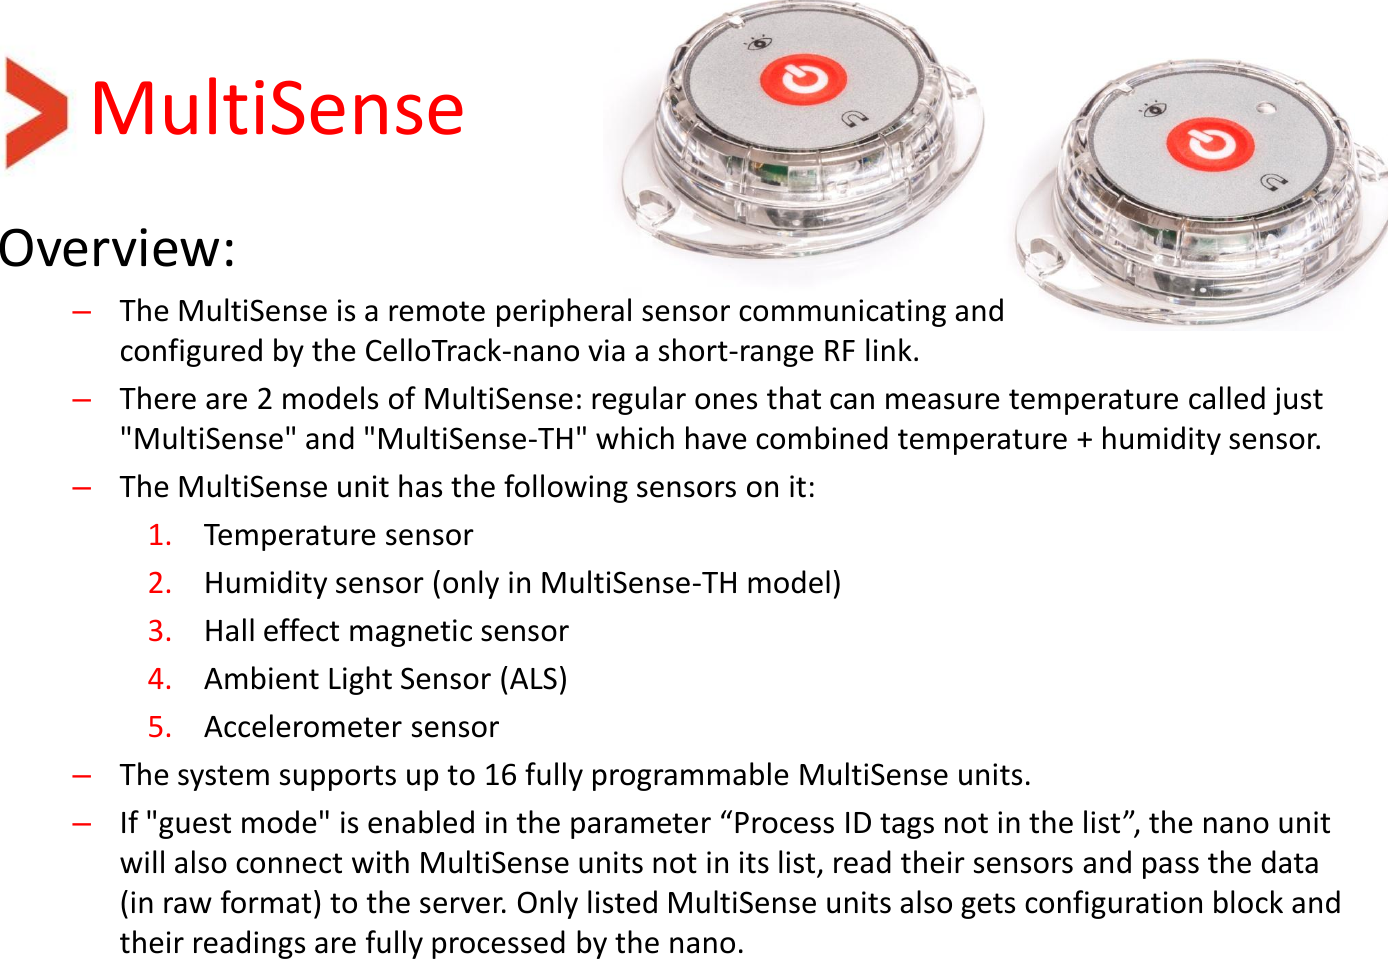 MultiSense Overview: –The MultiSense is a remote peripheral sensor communicating and  configured by the CelloTrack-nano via a short-range RF link.  –There are 2 models of MultiSense: regular ones that can measure temperature called just &quot;MultiSense&quot; and &quot;MultiSense-TH&quot; which have combined temperature + humidity sensor. –The MultiSense unit has the following sensors on it: 1. Temperature sensor 2. Humidity sensor (only in MultiSense-TH model) 3. Hall effect magnetic sensor 4. Ambient Light Sensor (ALS) 5. Accelerometer sensor –The system supports up to 16 fully programmable MultiSense units. –If &quot;guest mode&quot; is enabled in the parameter “Process ID tags not in the list”, the nano unit will also connect with MultiSense units not in its list, read their sensors and pass the data (in raw format) to the server. Only listed MultiSense units also gets configuration block and their readings are fully processed by the nano.   